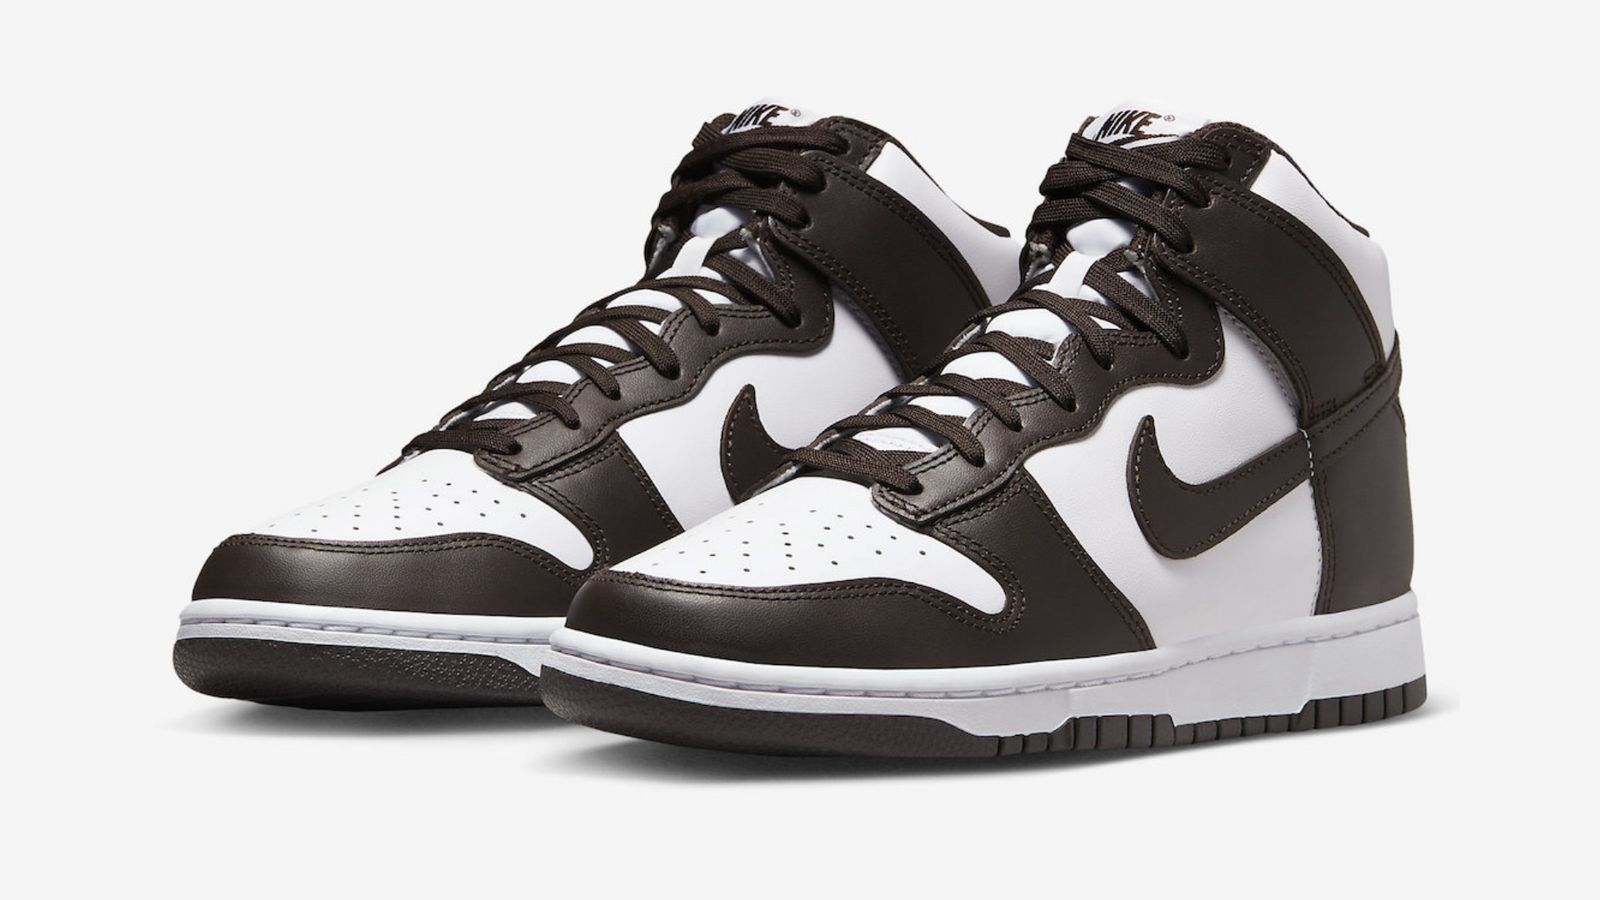 Nike Dunk High "Palomino" product image of a pair of white and dark brown high-top sneakers.